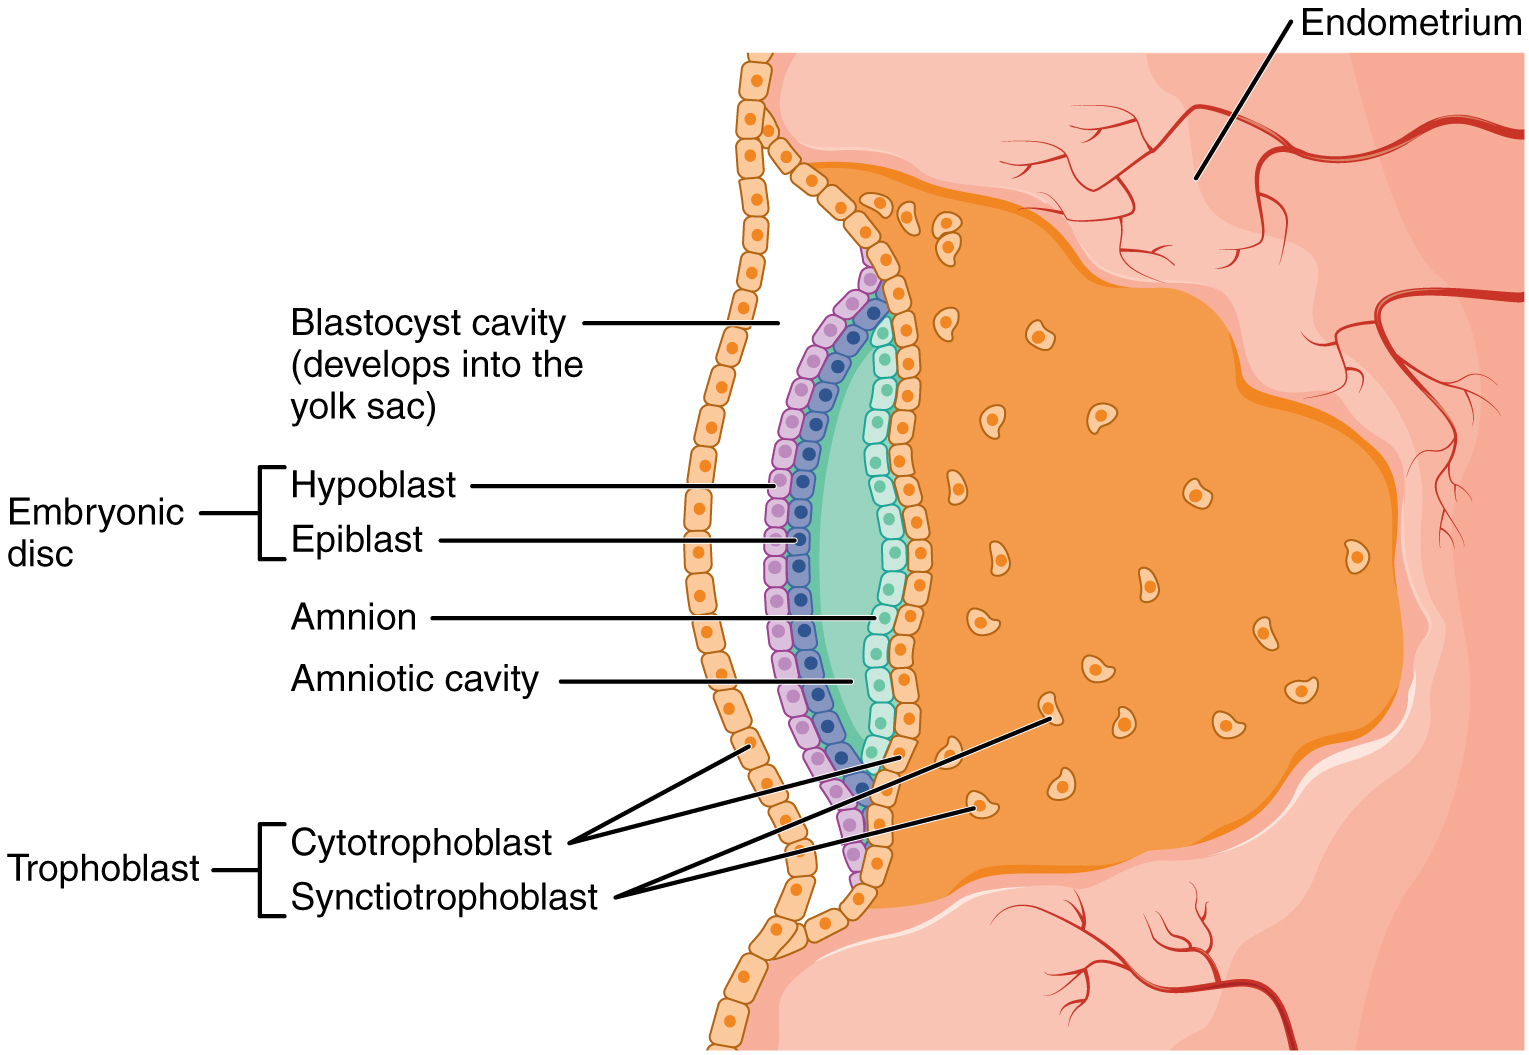 This image shows the development of the amniotic cavity and the location of the embryonic disc.